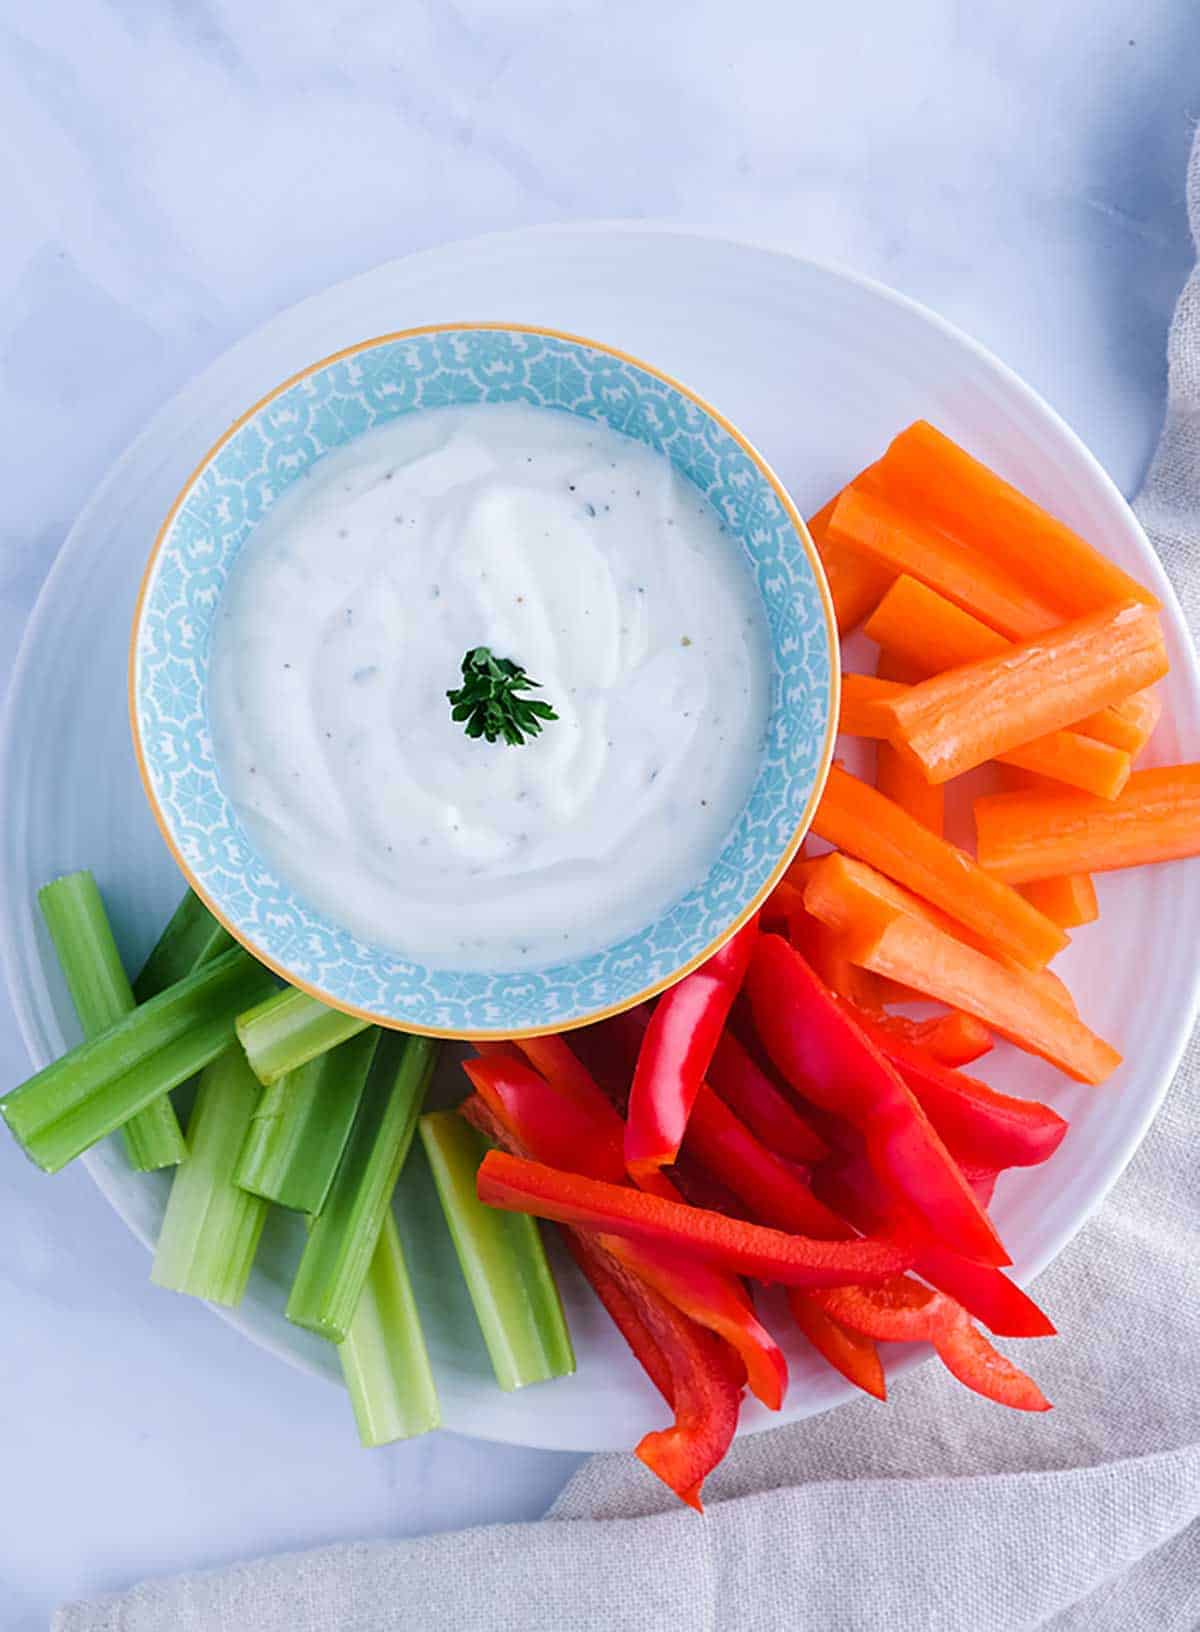 A bowl of ranch dip with carrots, celery and red pepper